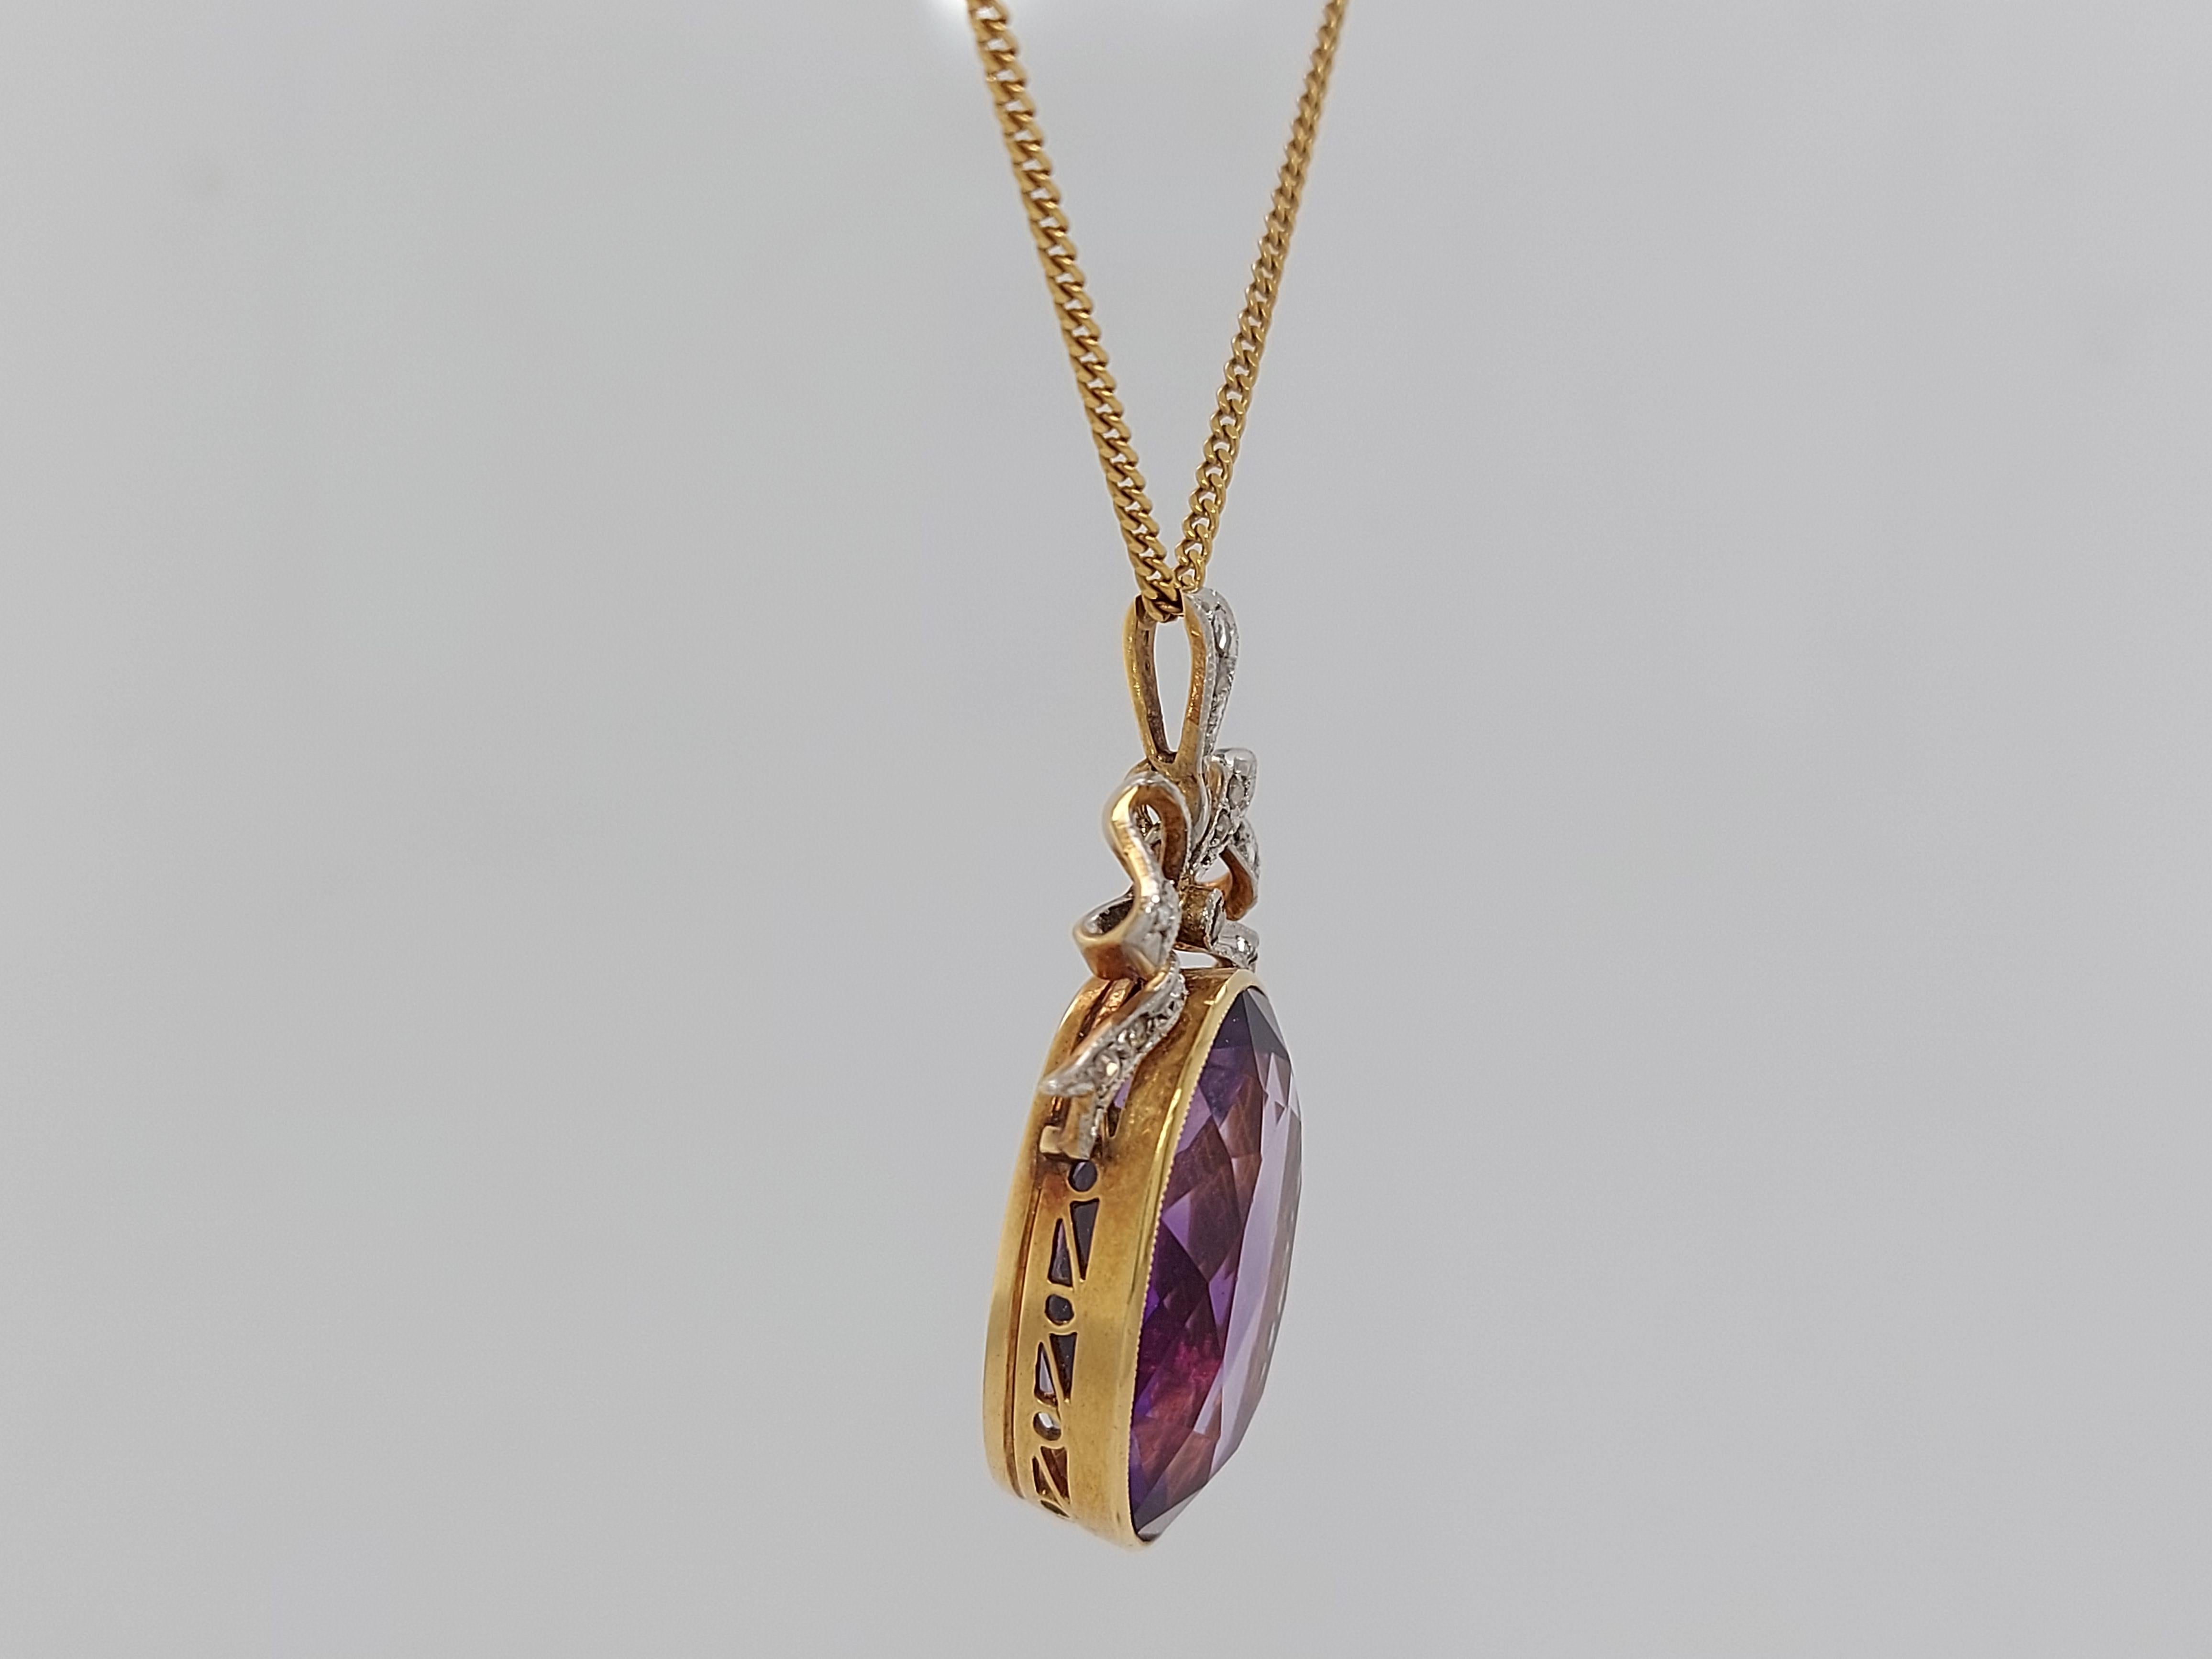 Vintage Yellow Gold Pendant Necklace with Amethyst and Rose Cut Diamonds For Sale 9